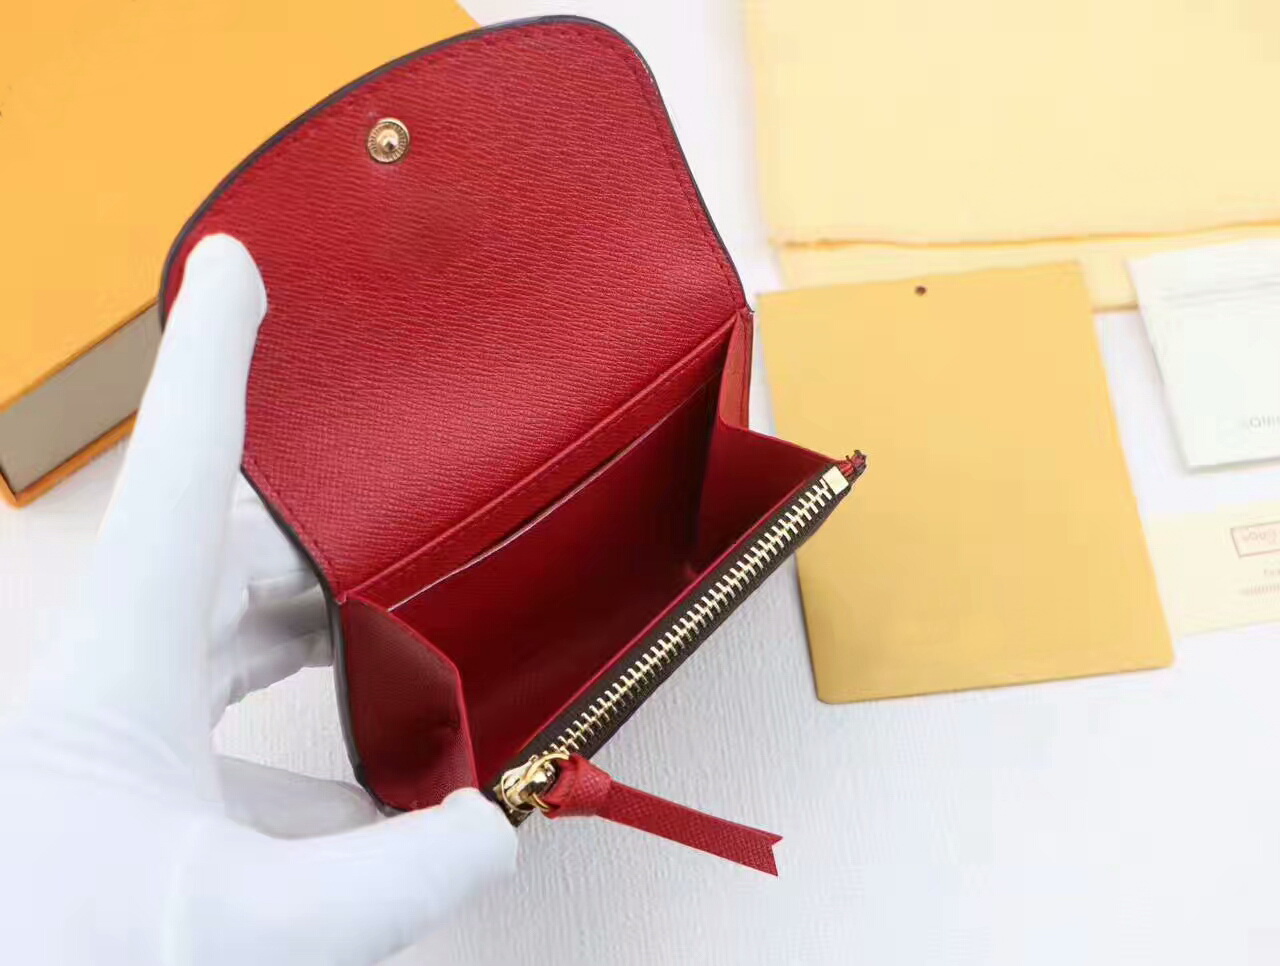 

2020 Fashion Women/Men Genuine Leather Short Hasp Wallets 11cm with dust bag box card Purses CX#48 Free Shipping 62361, Brown letter + dark red